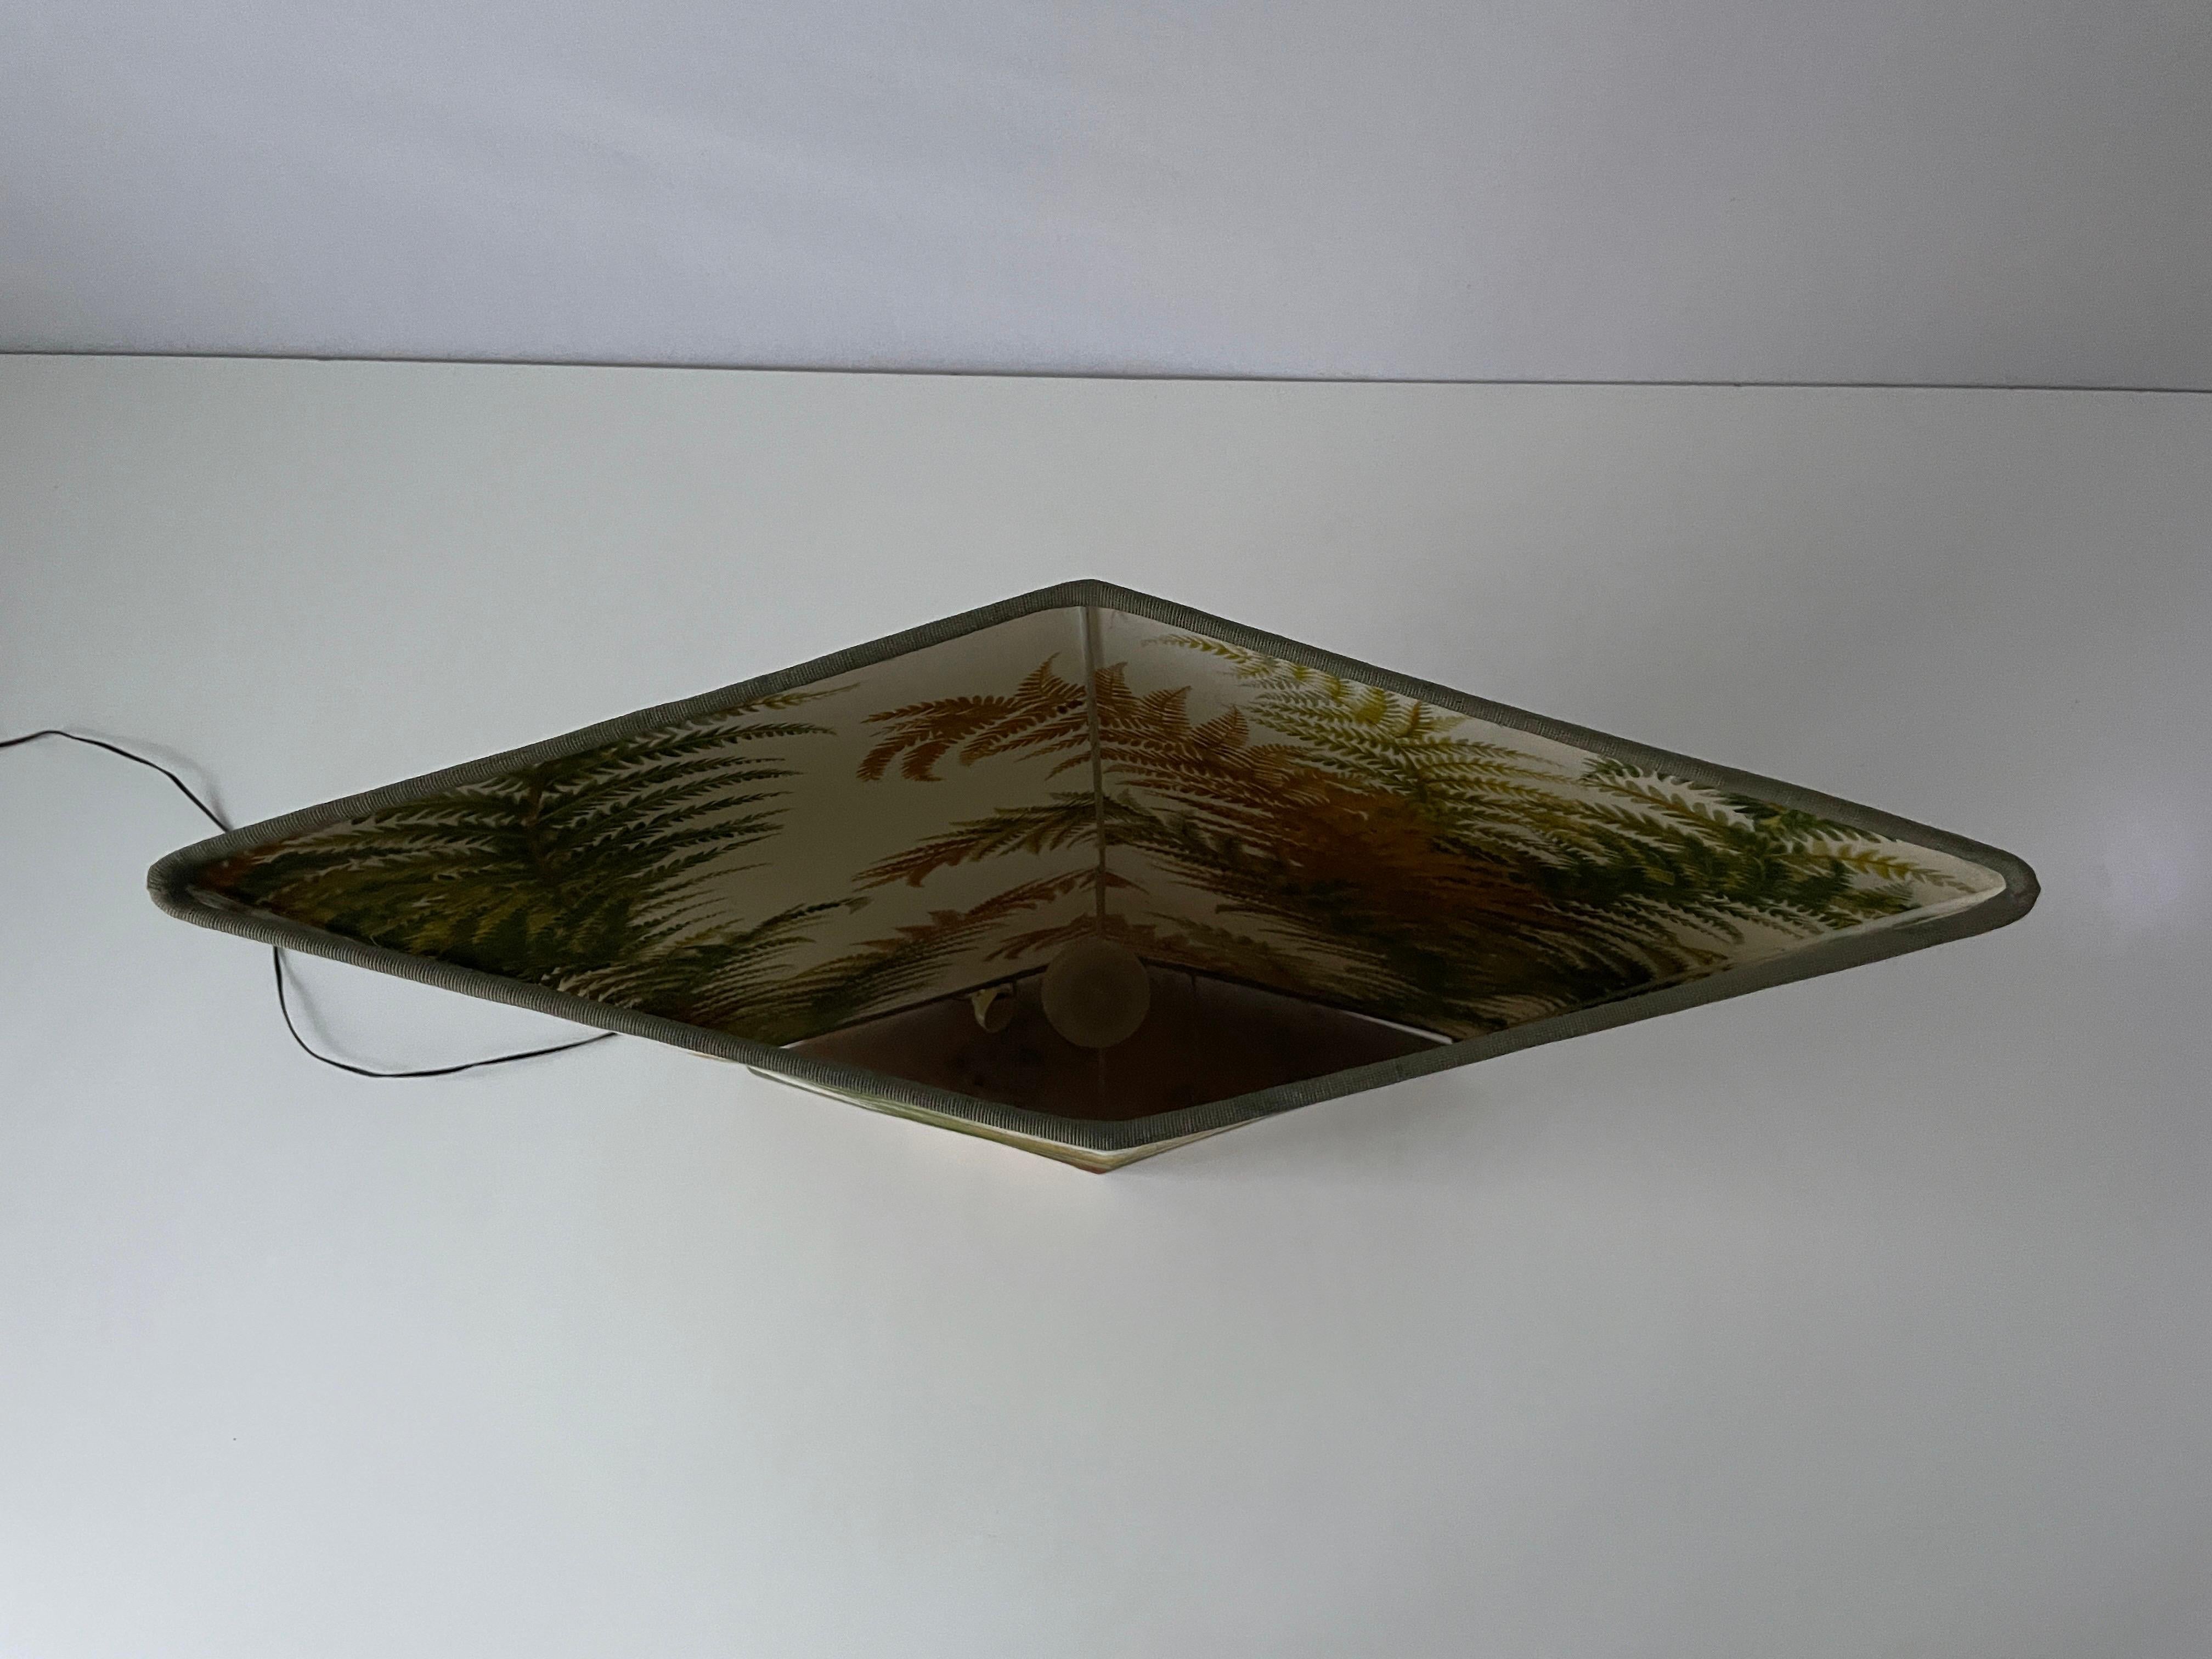 Forest Flower Theme Fabric Shade Floor Lamp with Signed Wood Base, 1950s, Italy For Sale 4